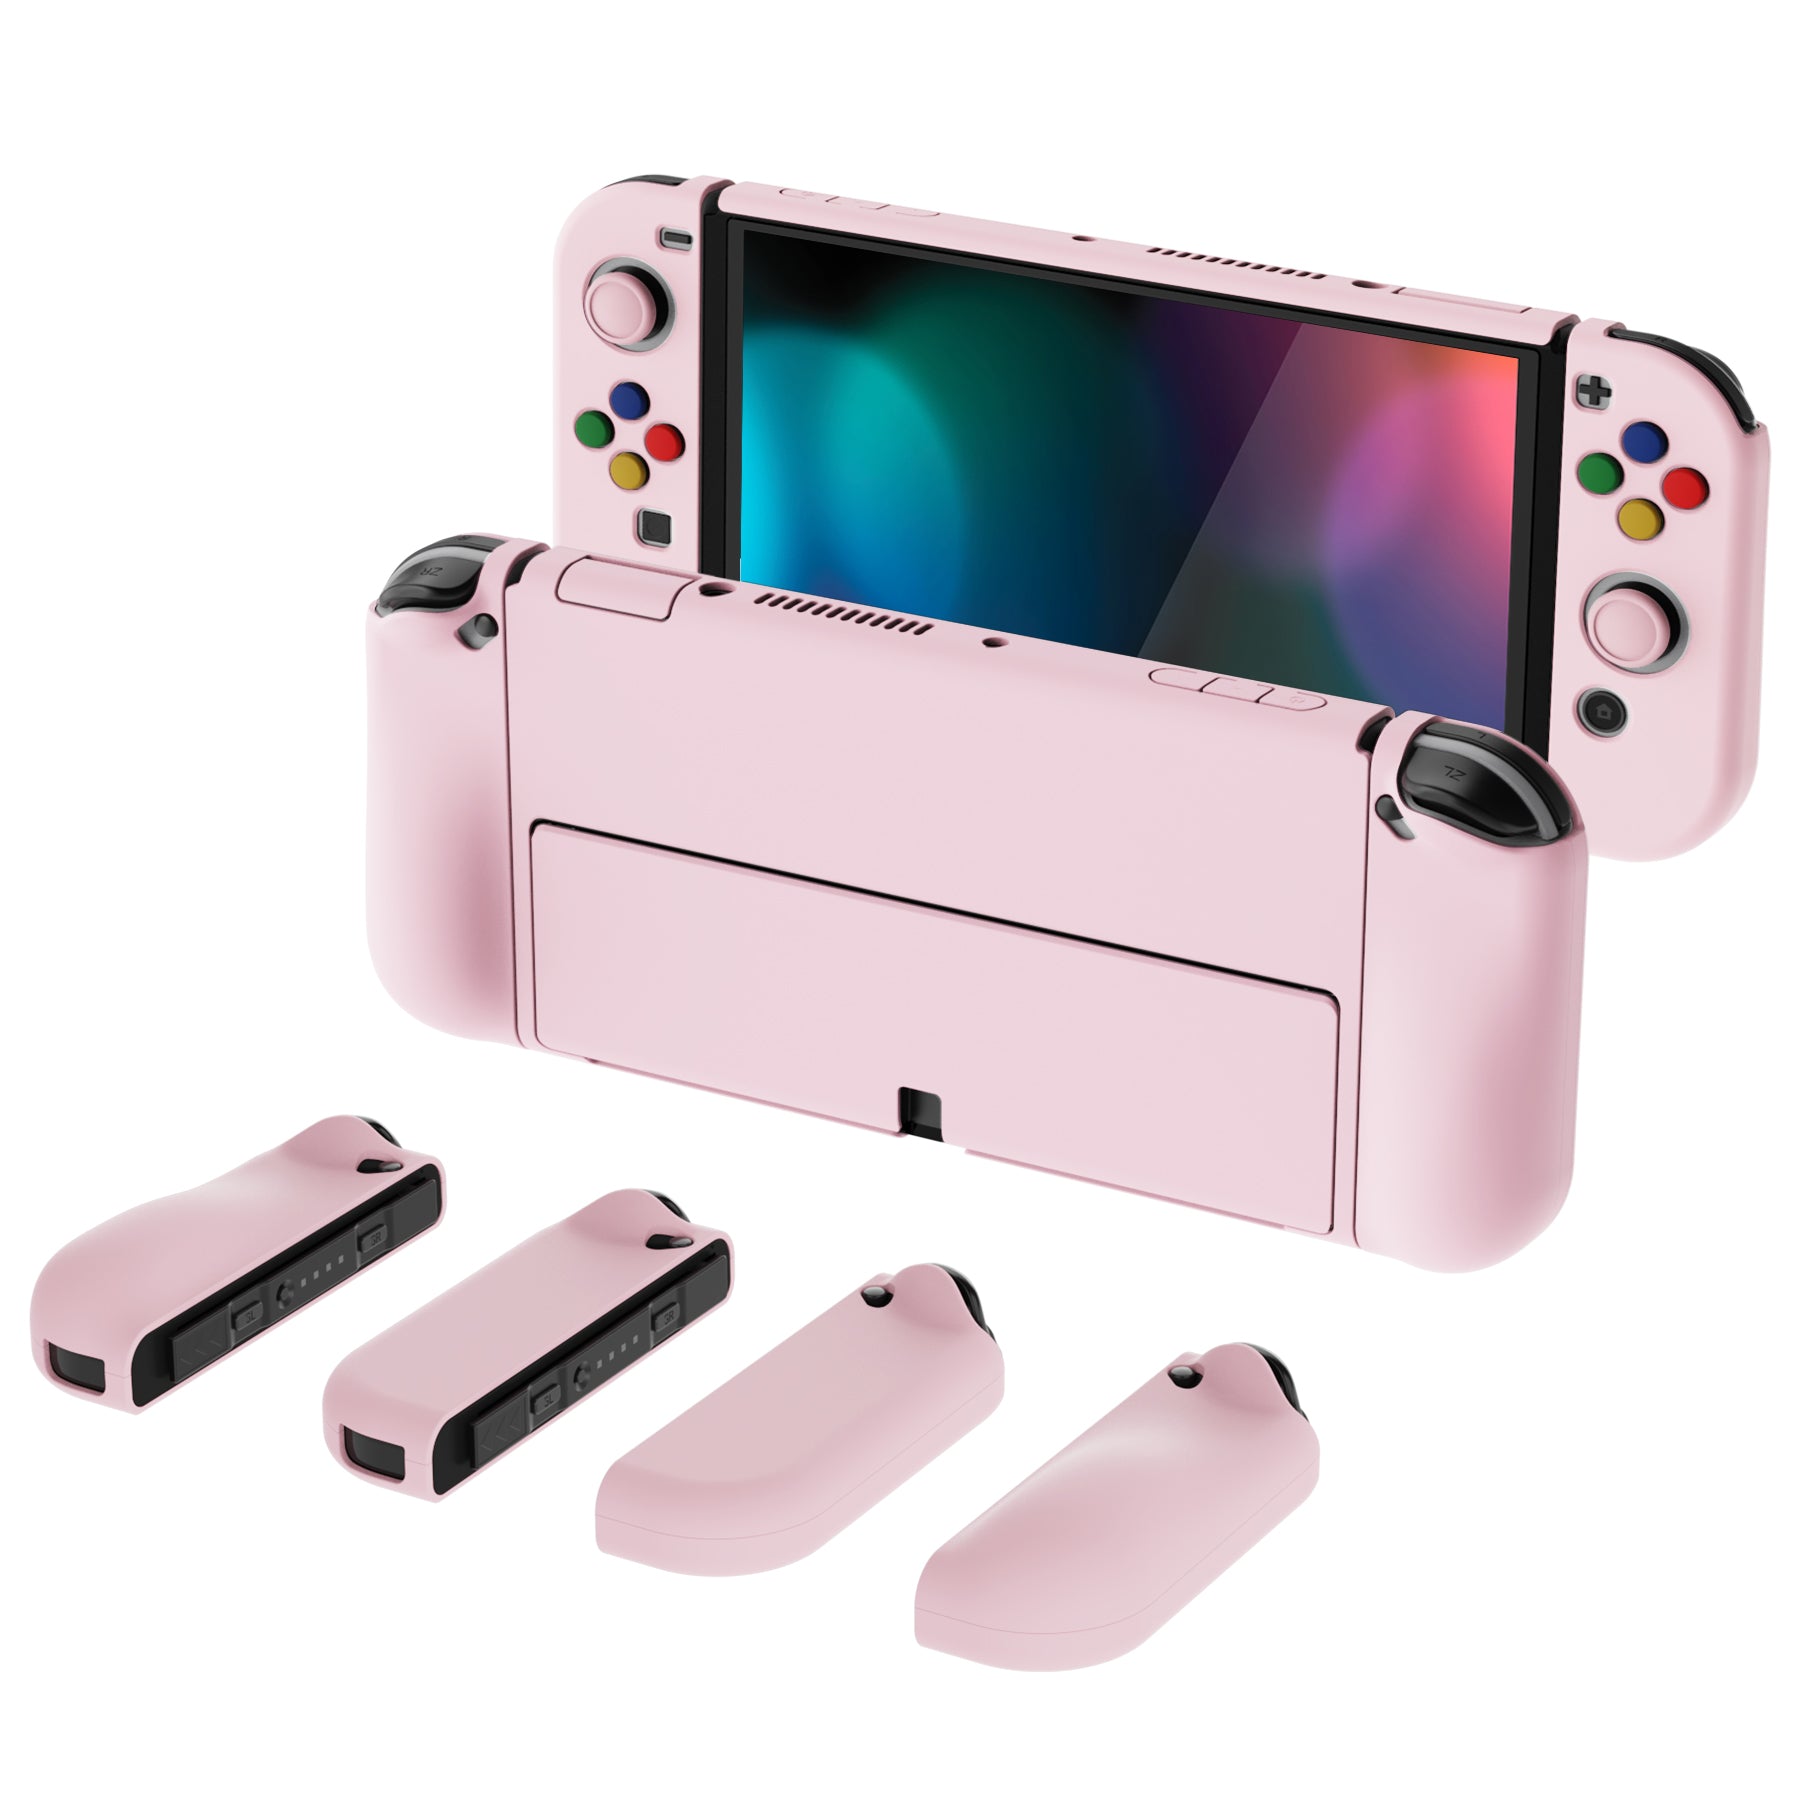 PlayVital AlterGrips Protective Slim Case for Nintendo Switch OLED, Ergonomic Grip Cover for Joycon, Dockable Hard Shell for Switch OLED with Thumb Grip Caps & Button Caps - Cherry Blossoms Pink - JSOYP3007 playvital